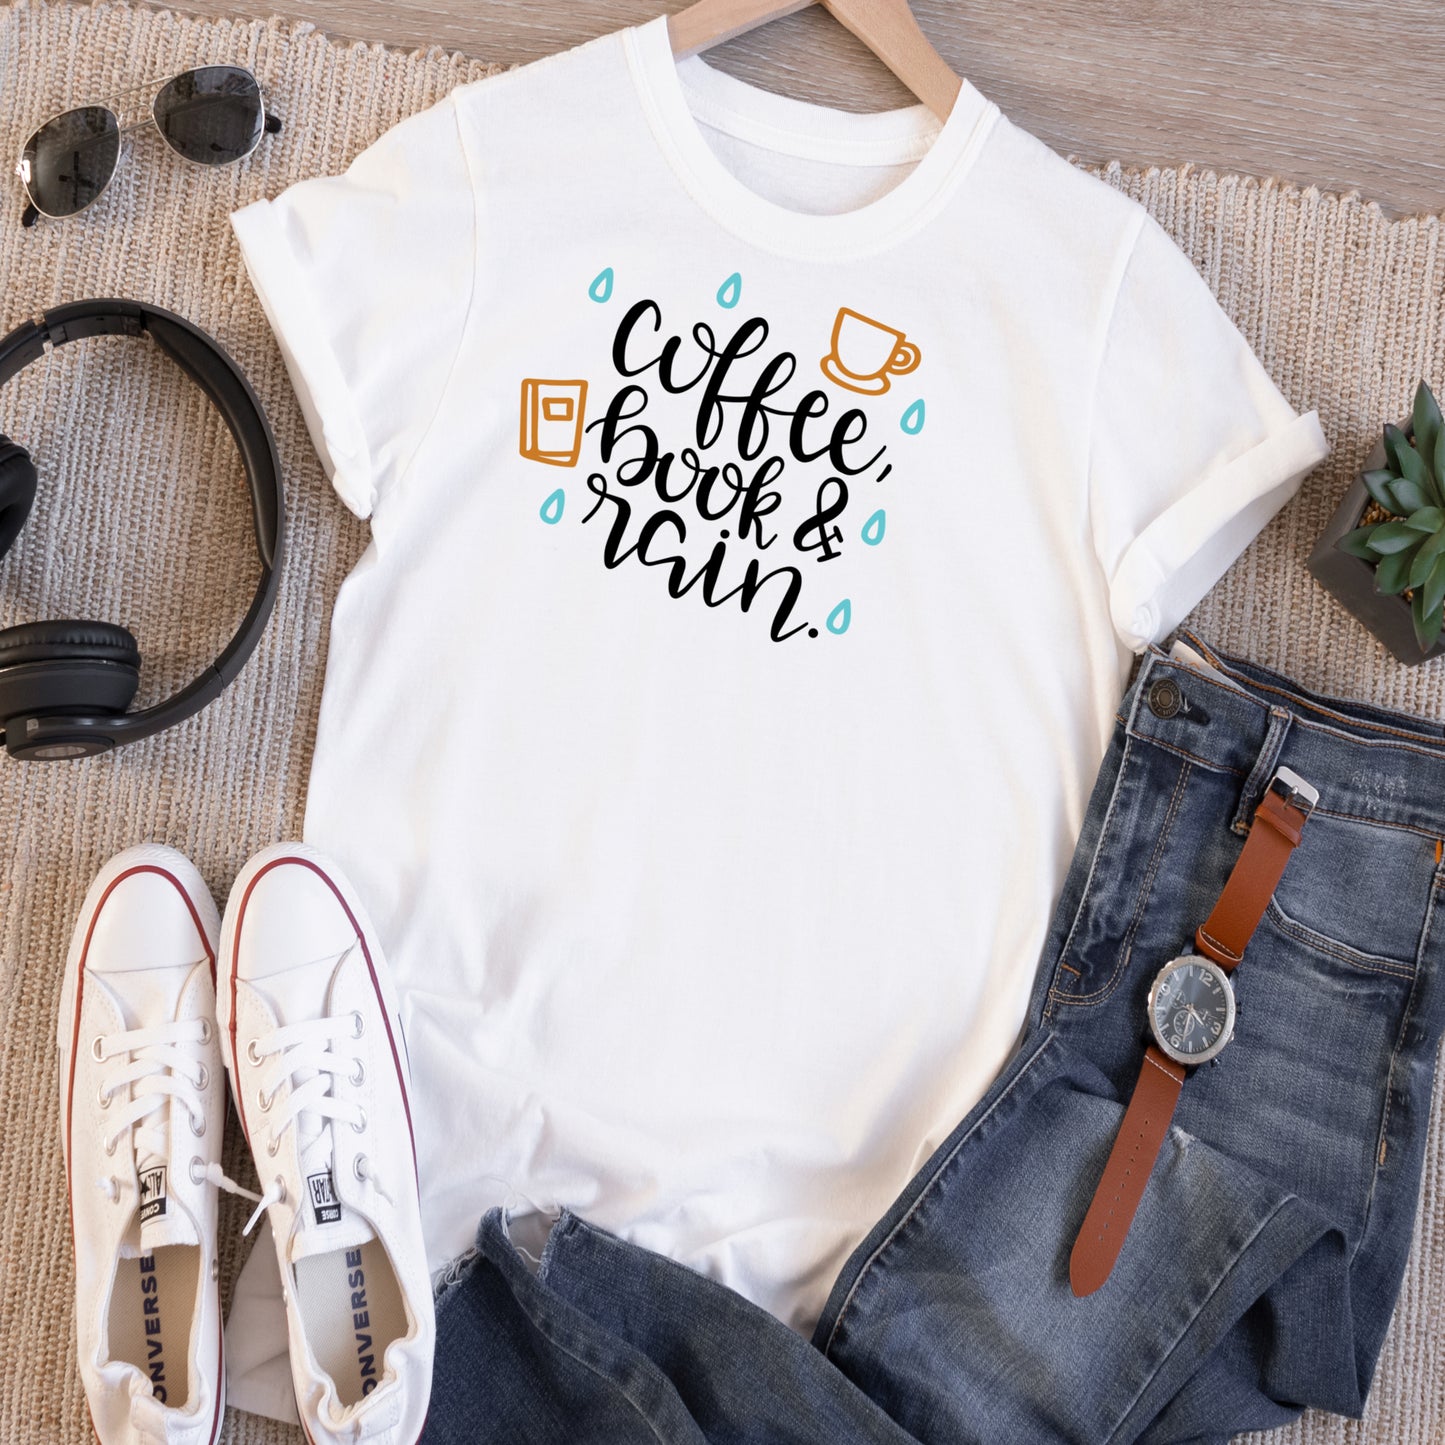 White short sleeve Tshirt with the saying Coffe, Book & Rain in black with blue raindrops and a golden coffee mug